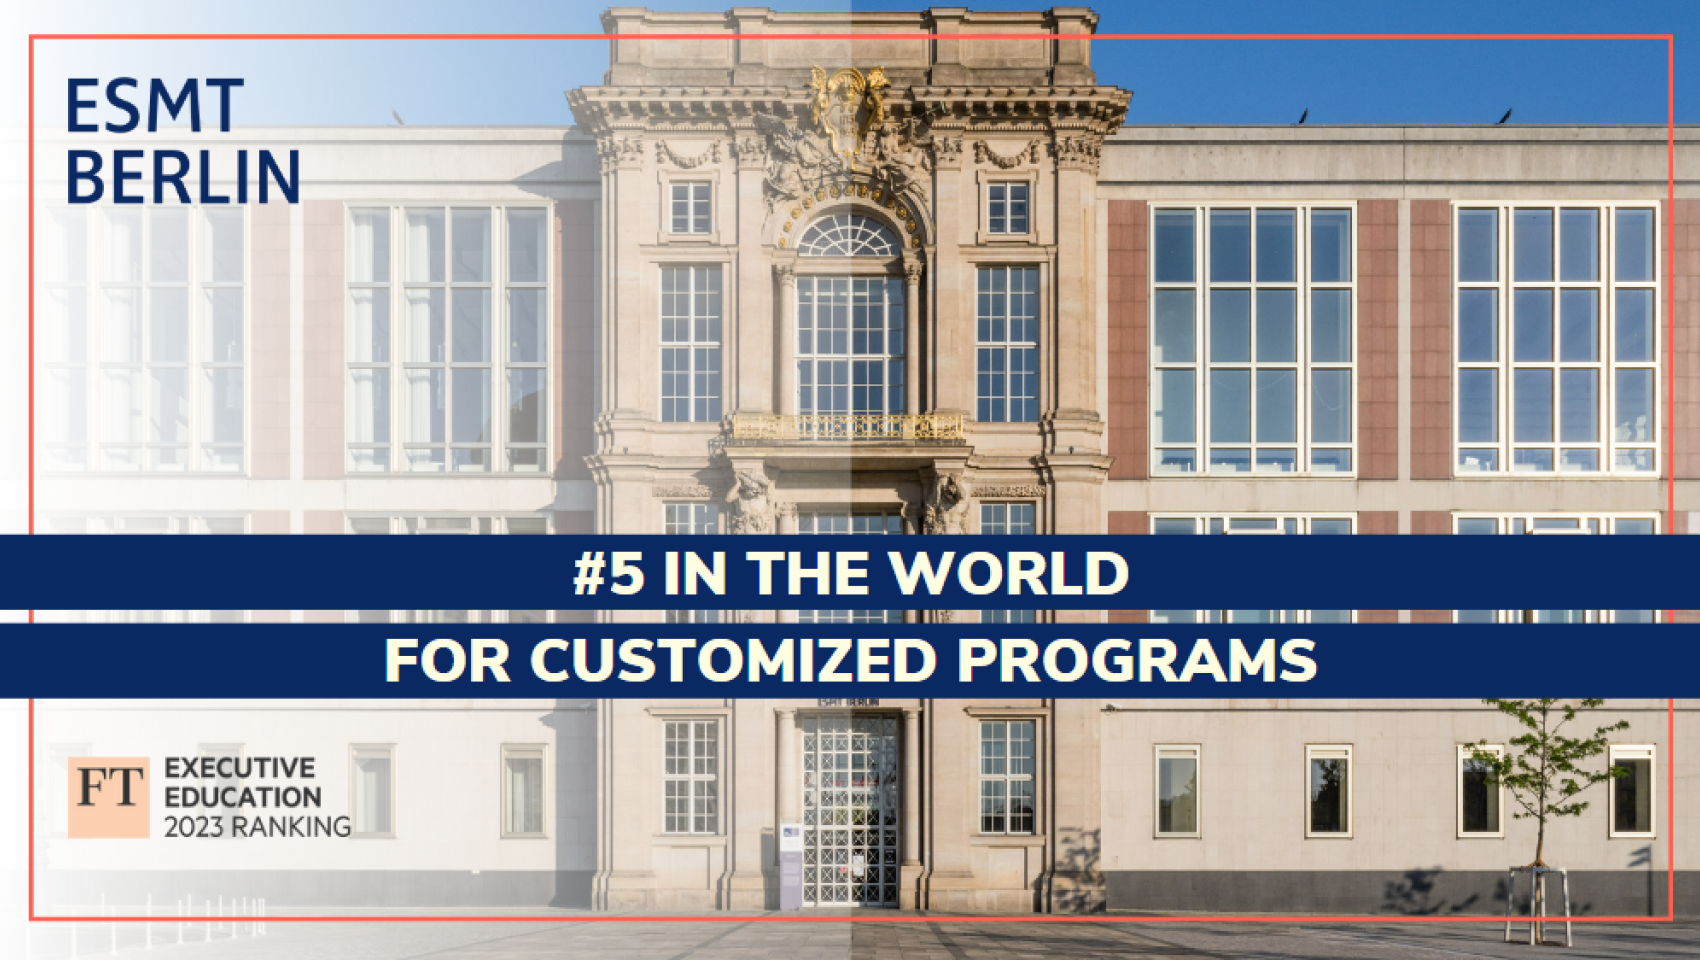 ESMT Berlin ranks 5th in the the world for customized programs